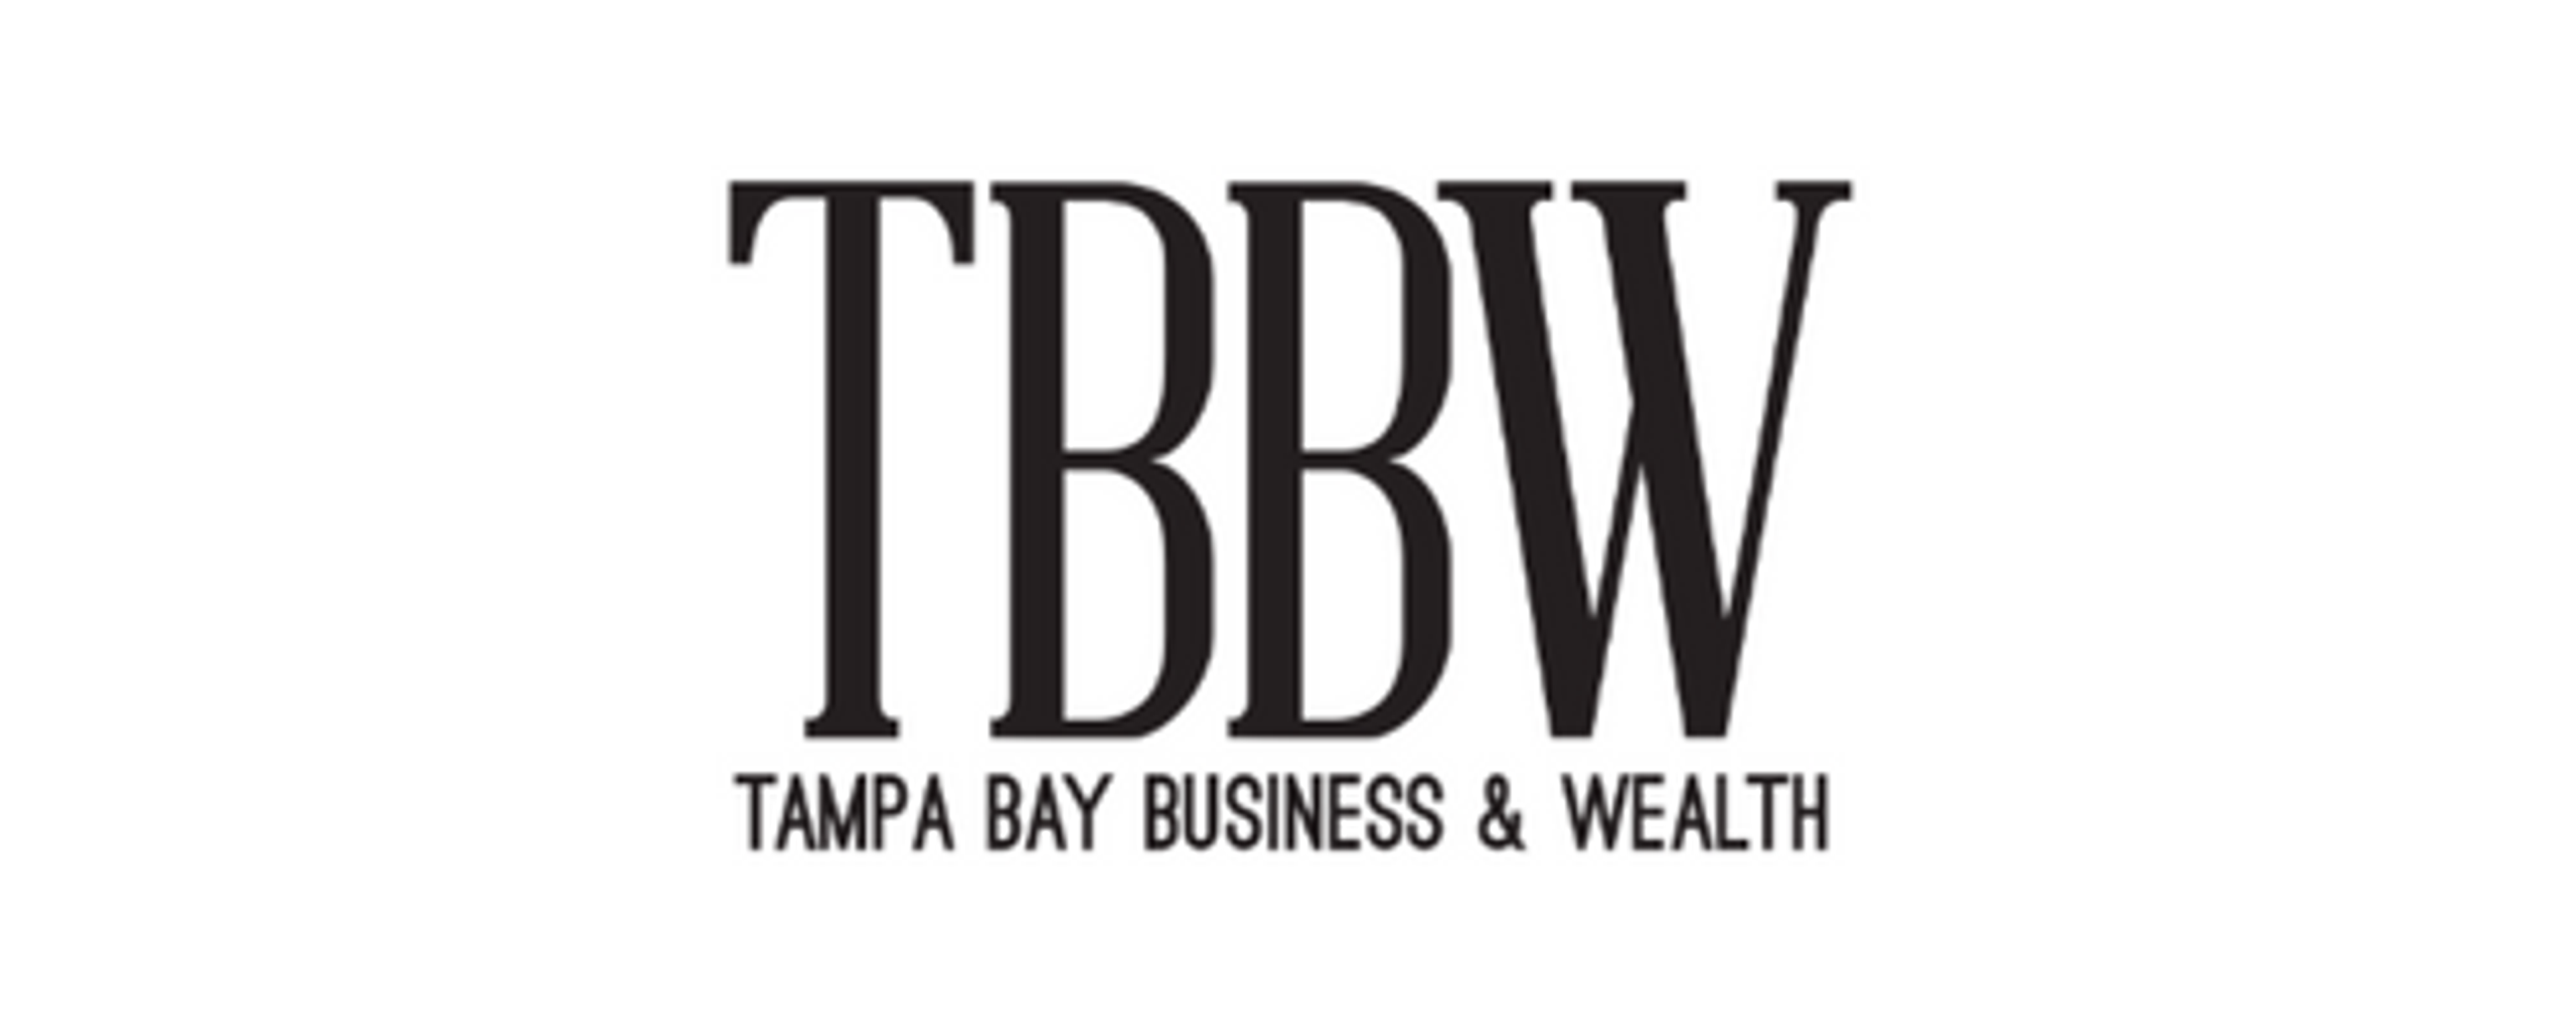 tampa bay business and wealth